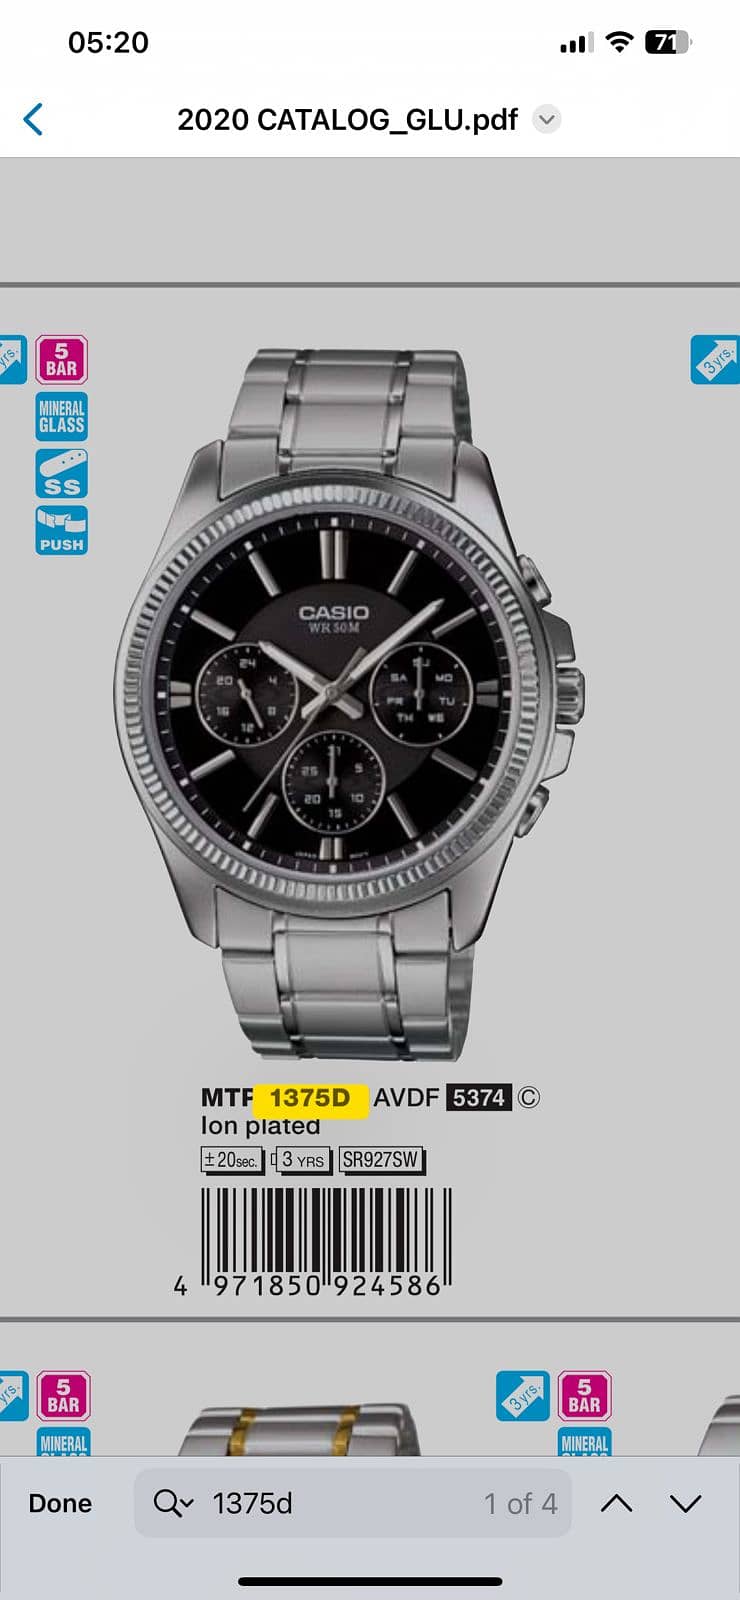 Casio watches on discounted prices 6